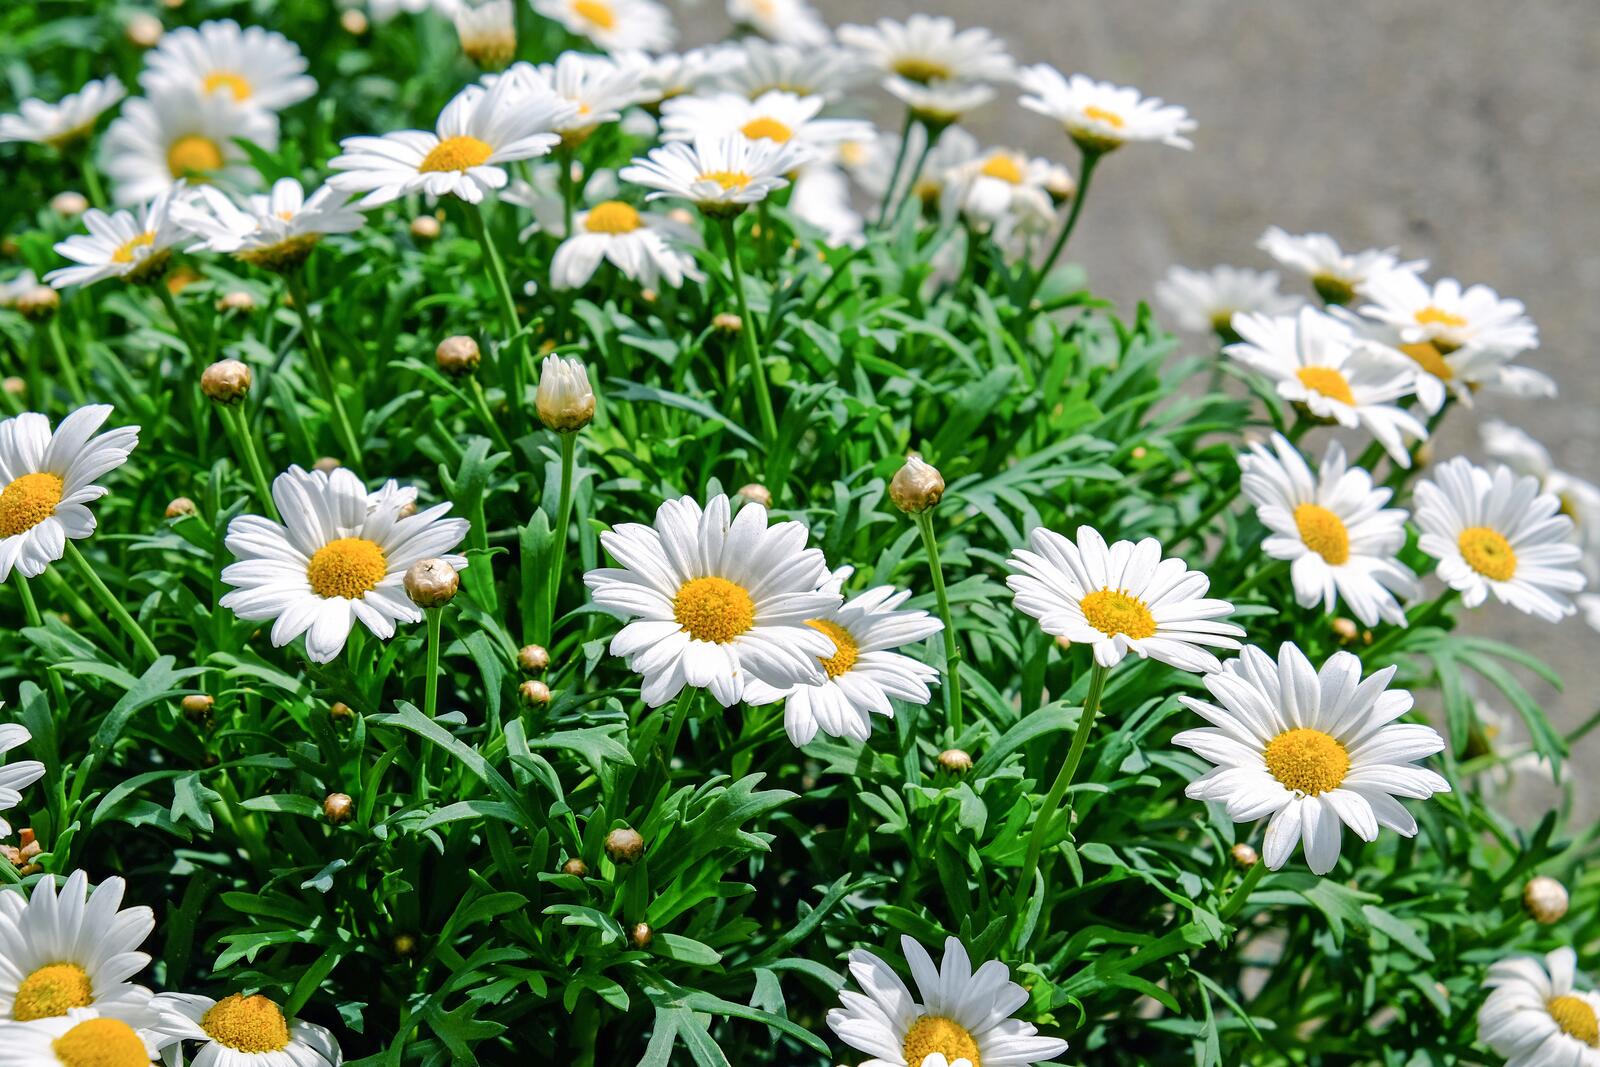 Free photo A flowerbed with snow-white daisies growing